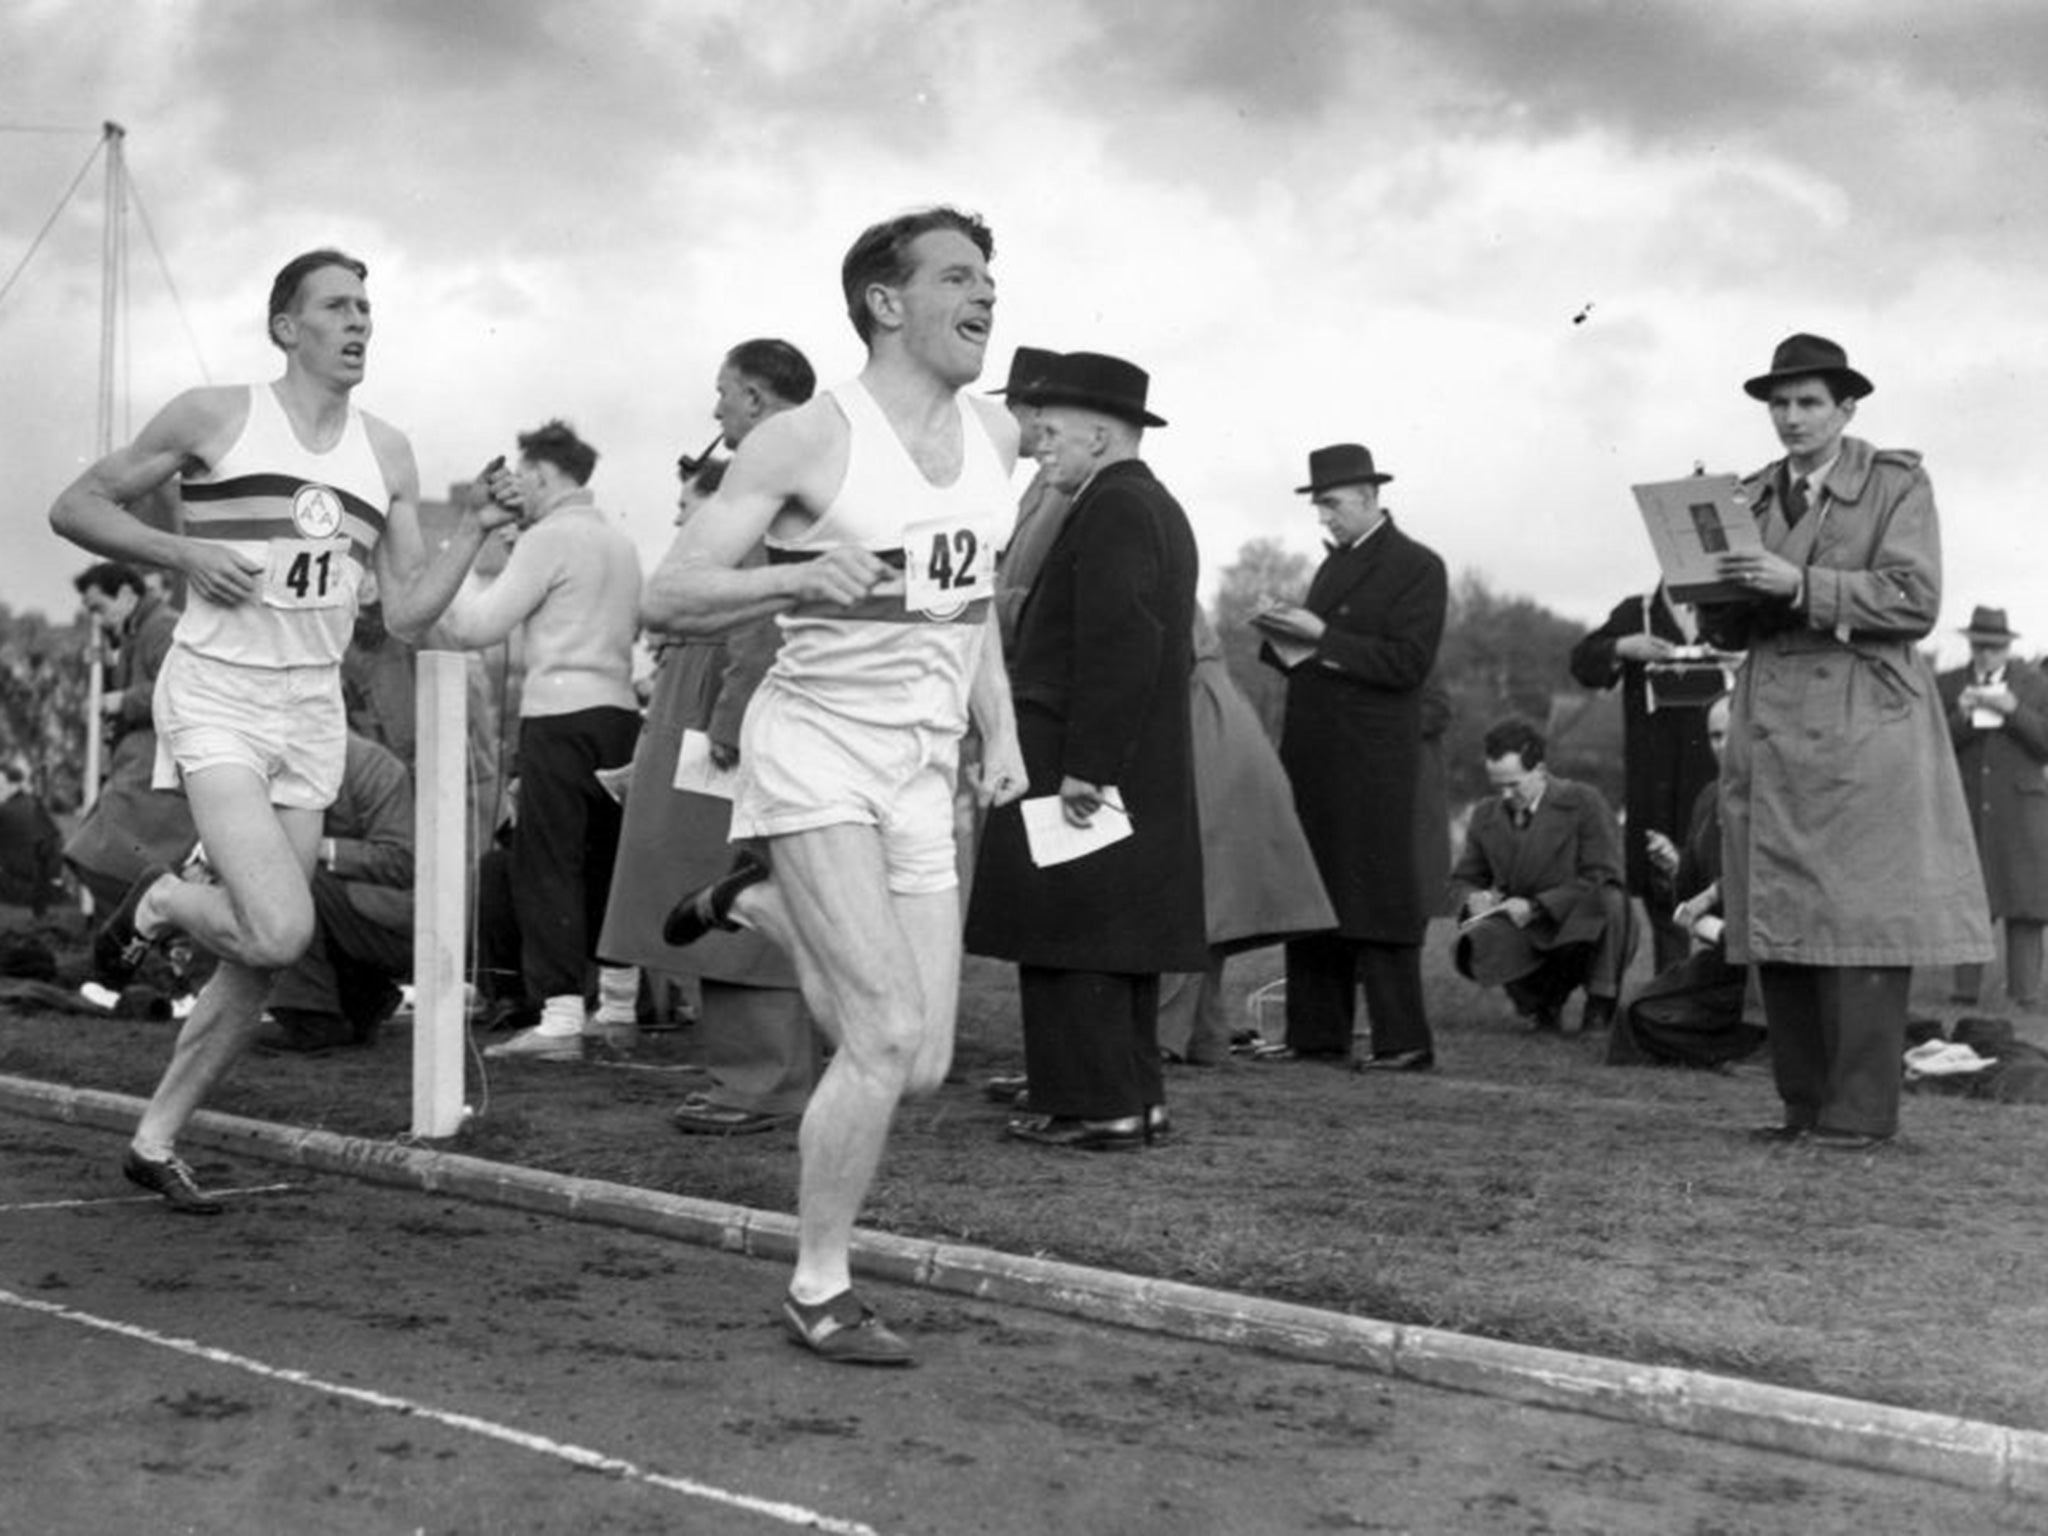 Roger Bannister (back) following pace man Chris Chataway, on the way to a new record of 3 minutes 59.4 seconds at Iffley Road, Oxford